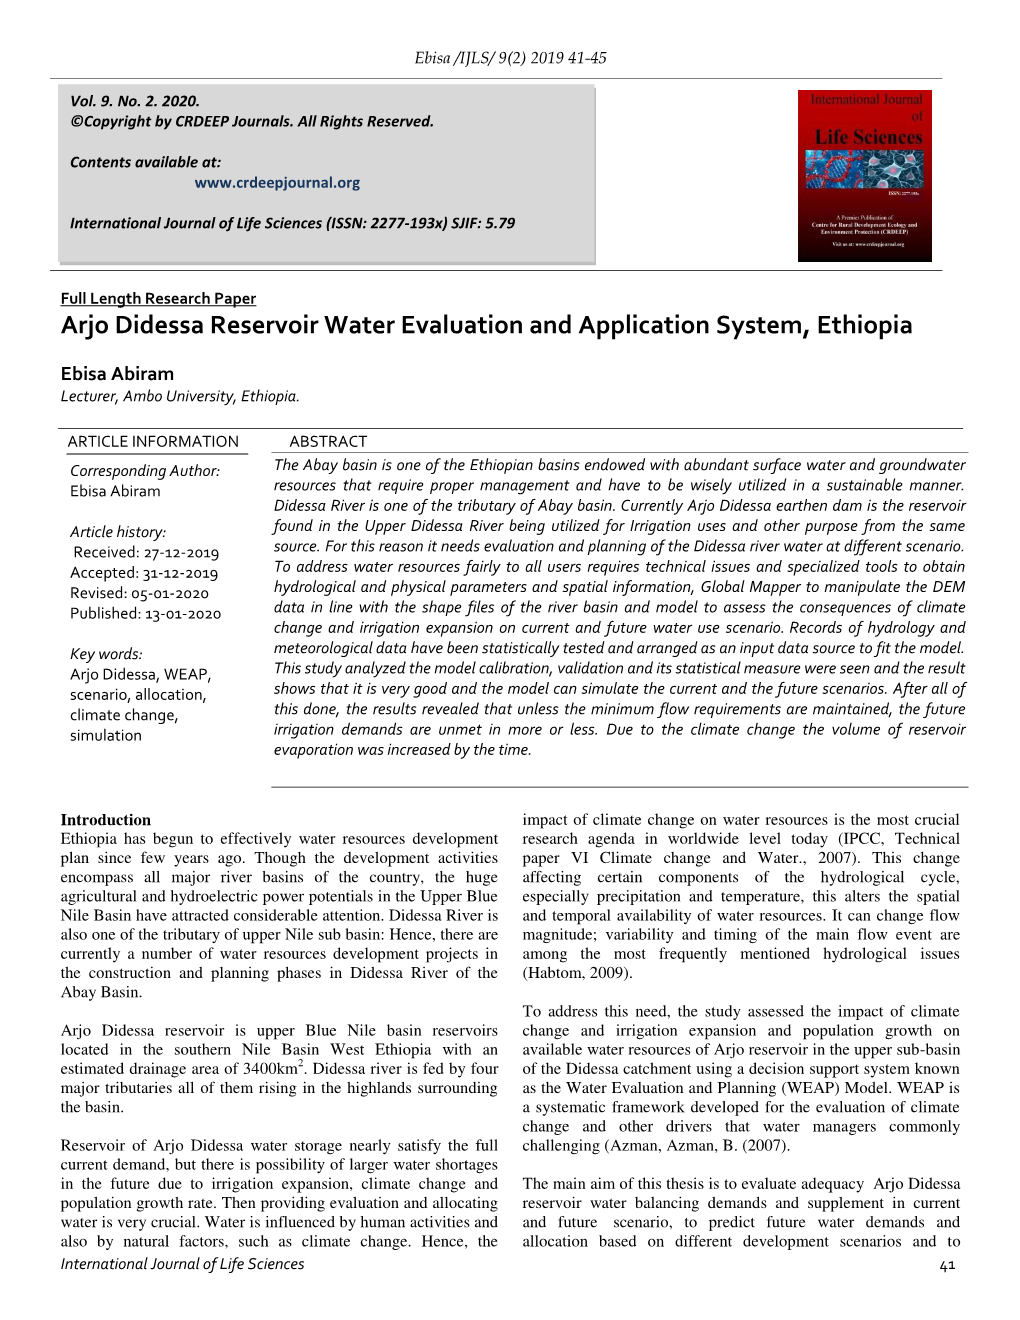 Arjo Didessa Reservoir Water Evaluation and Application System, Ethiopia